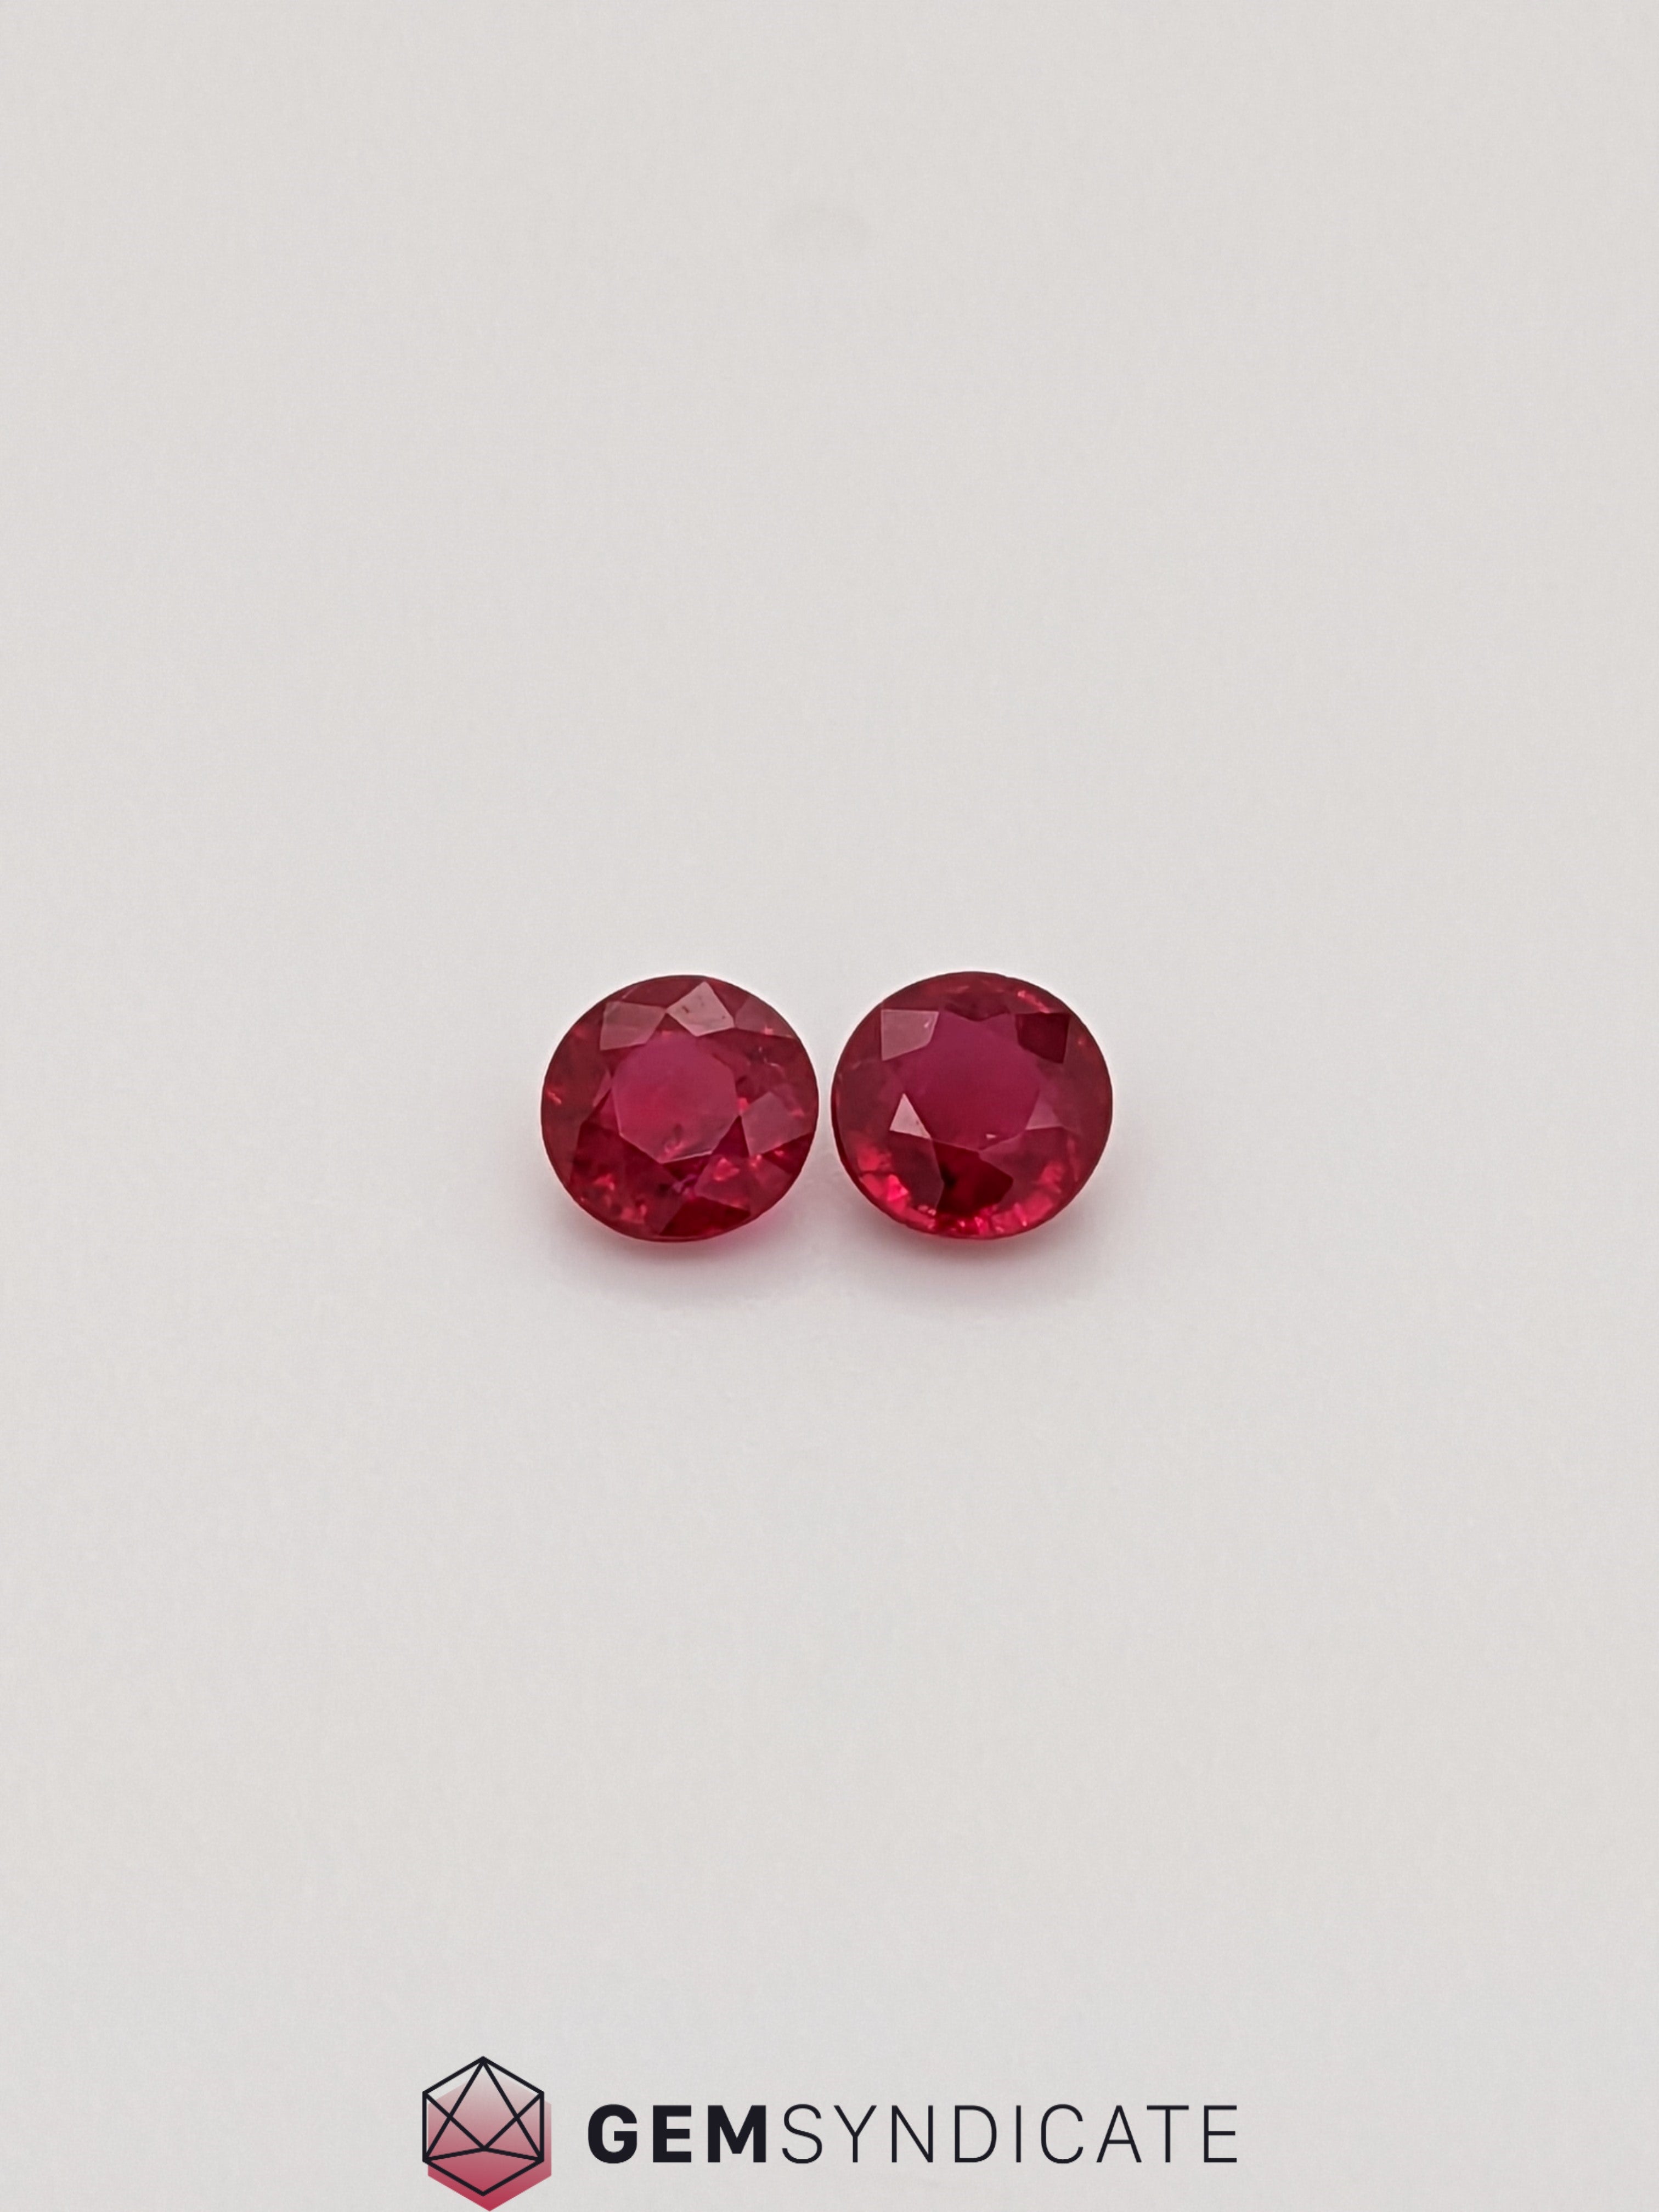 Lovely Round Red Ruby Pair 1.24ctw